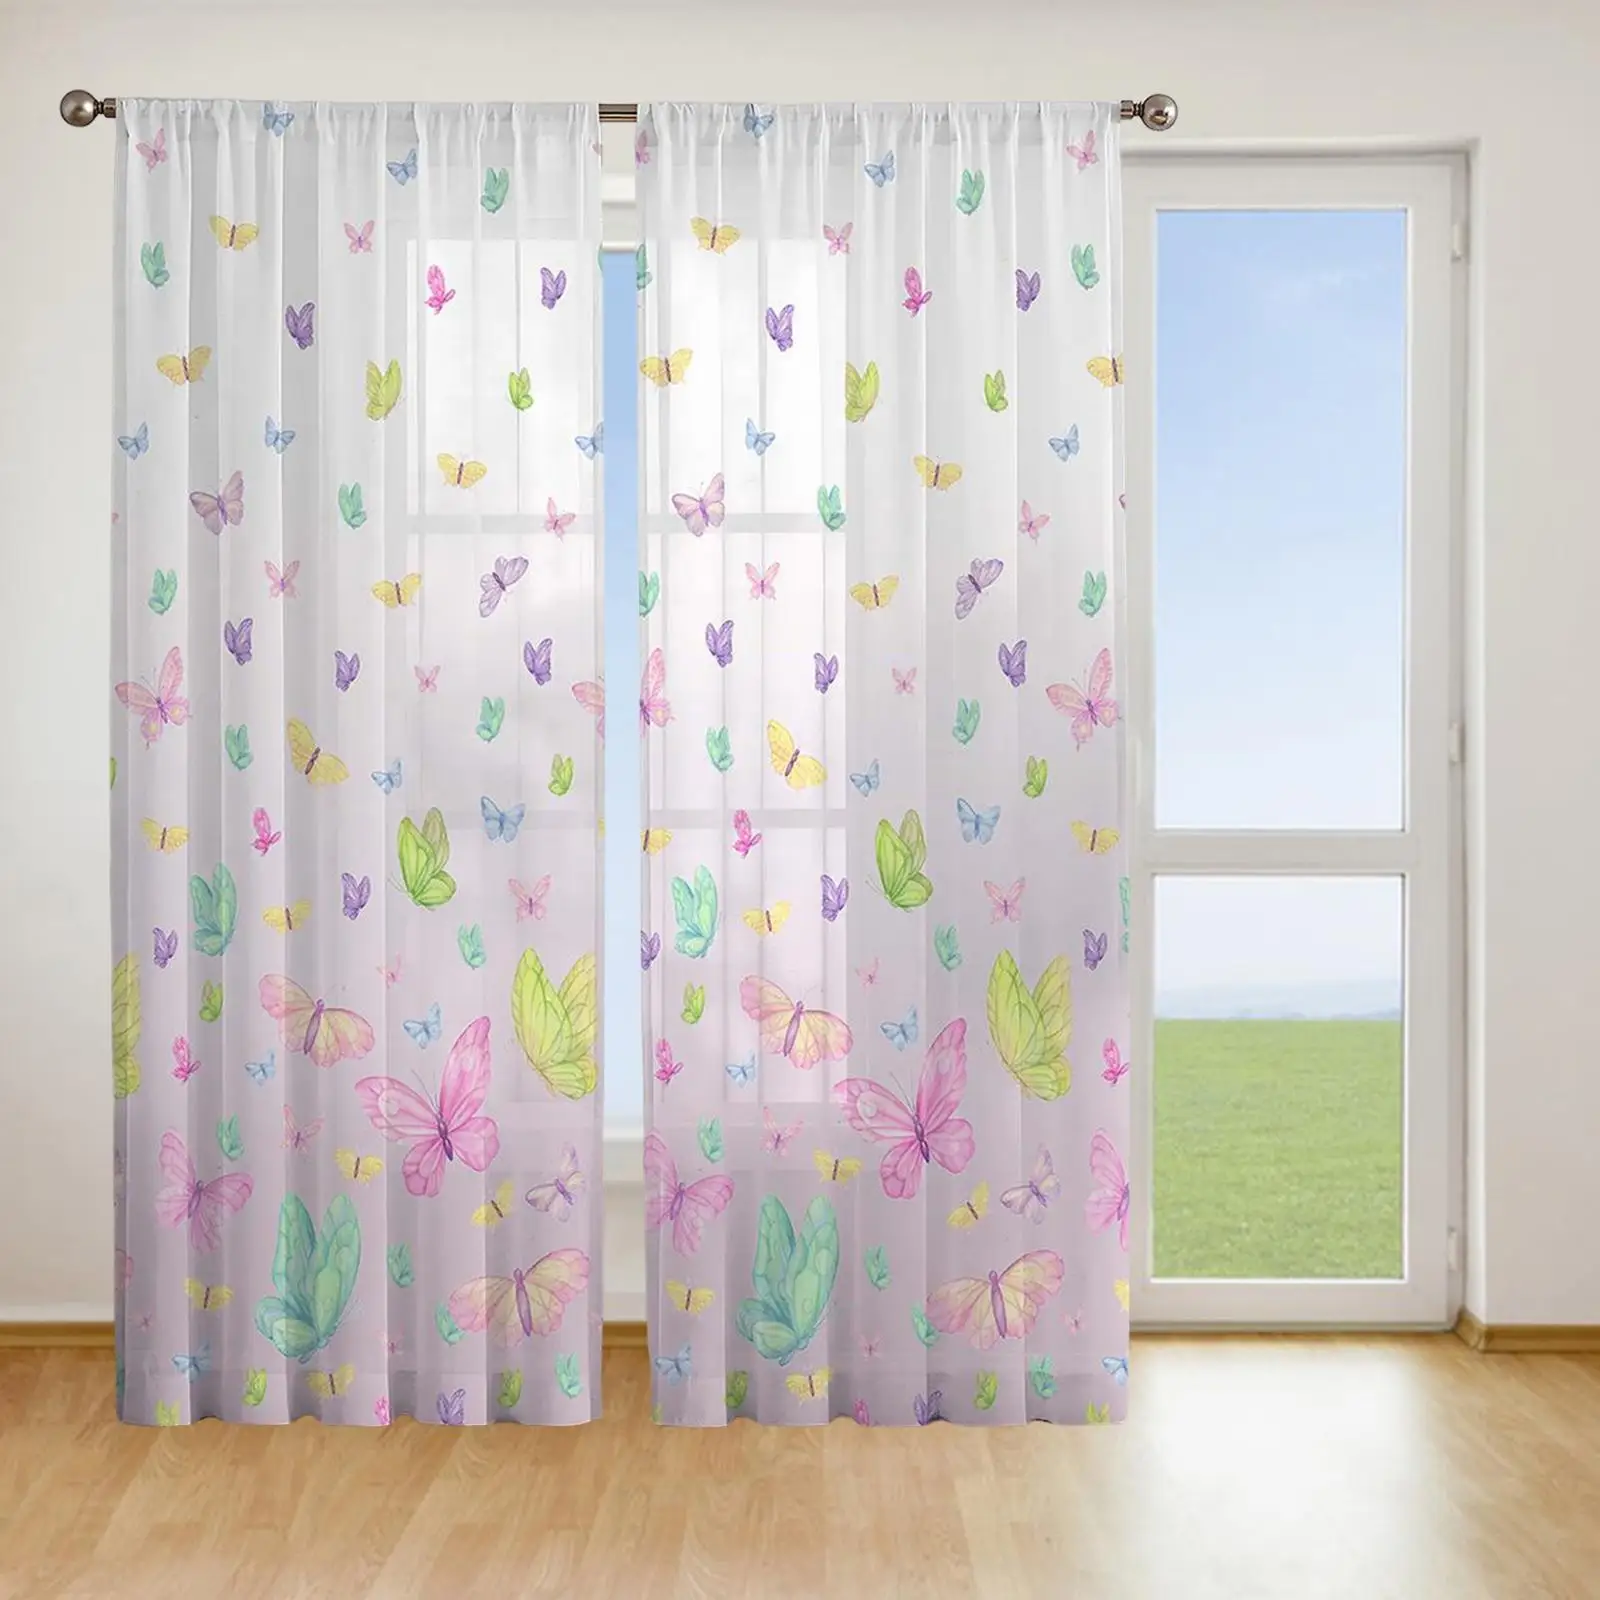 Colorful Butterfly Print Sheer Curtains Drapes Convenient Assemble Decorative Lightweight Modern with Grommets for Kitchen